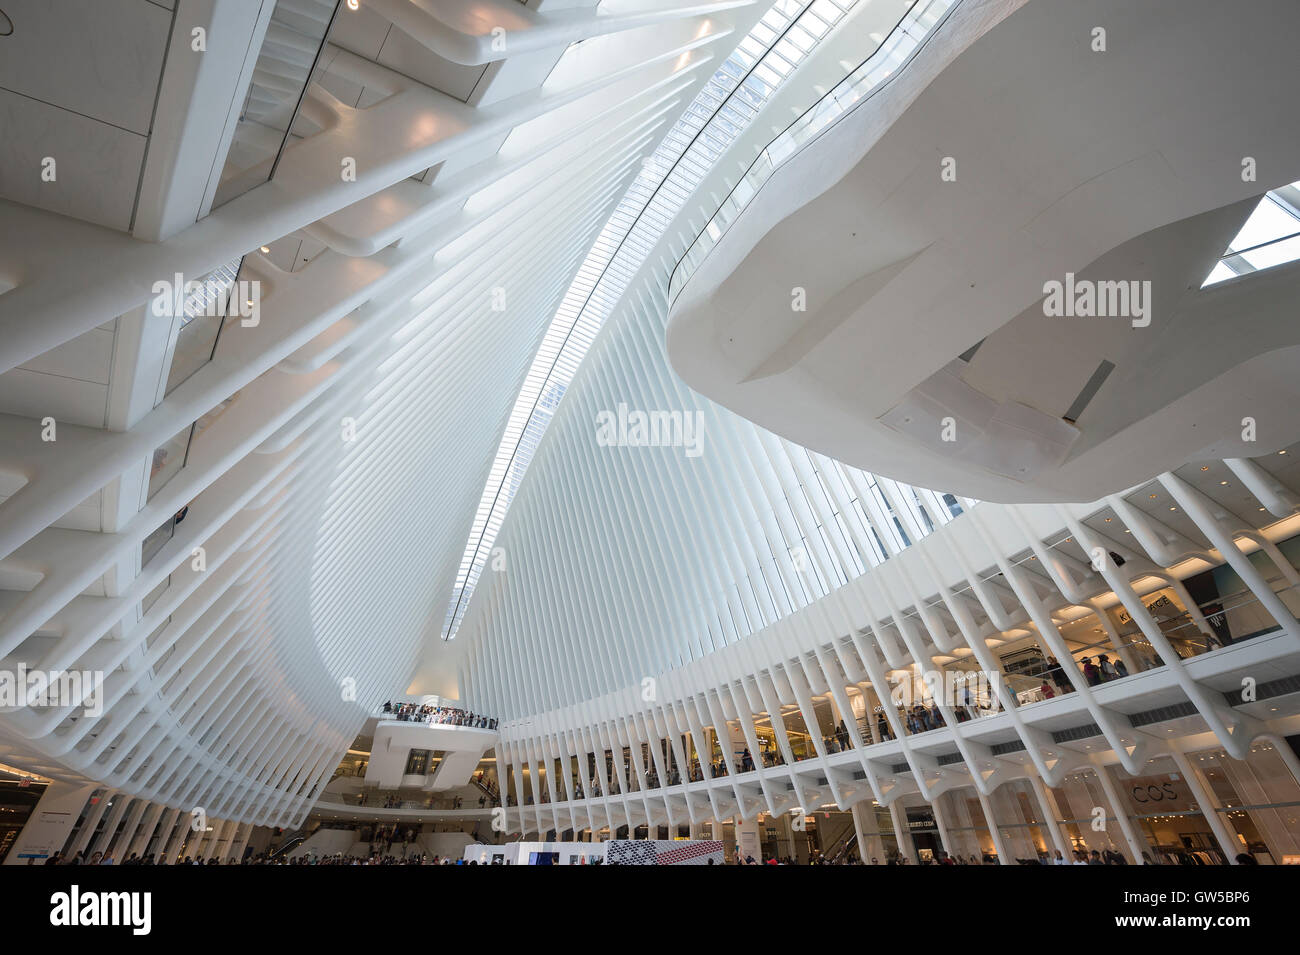 NEW YORK CITY - SEPTEMBER 4, 2016: Distinctive architectural form defines the main hall of the Oculus transportation hub. Stock Photo